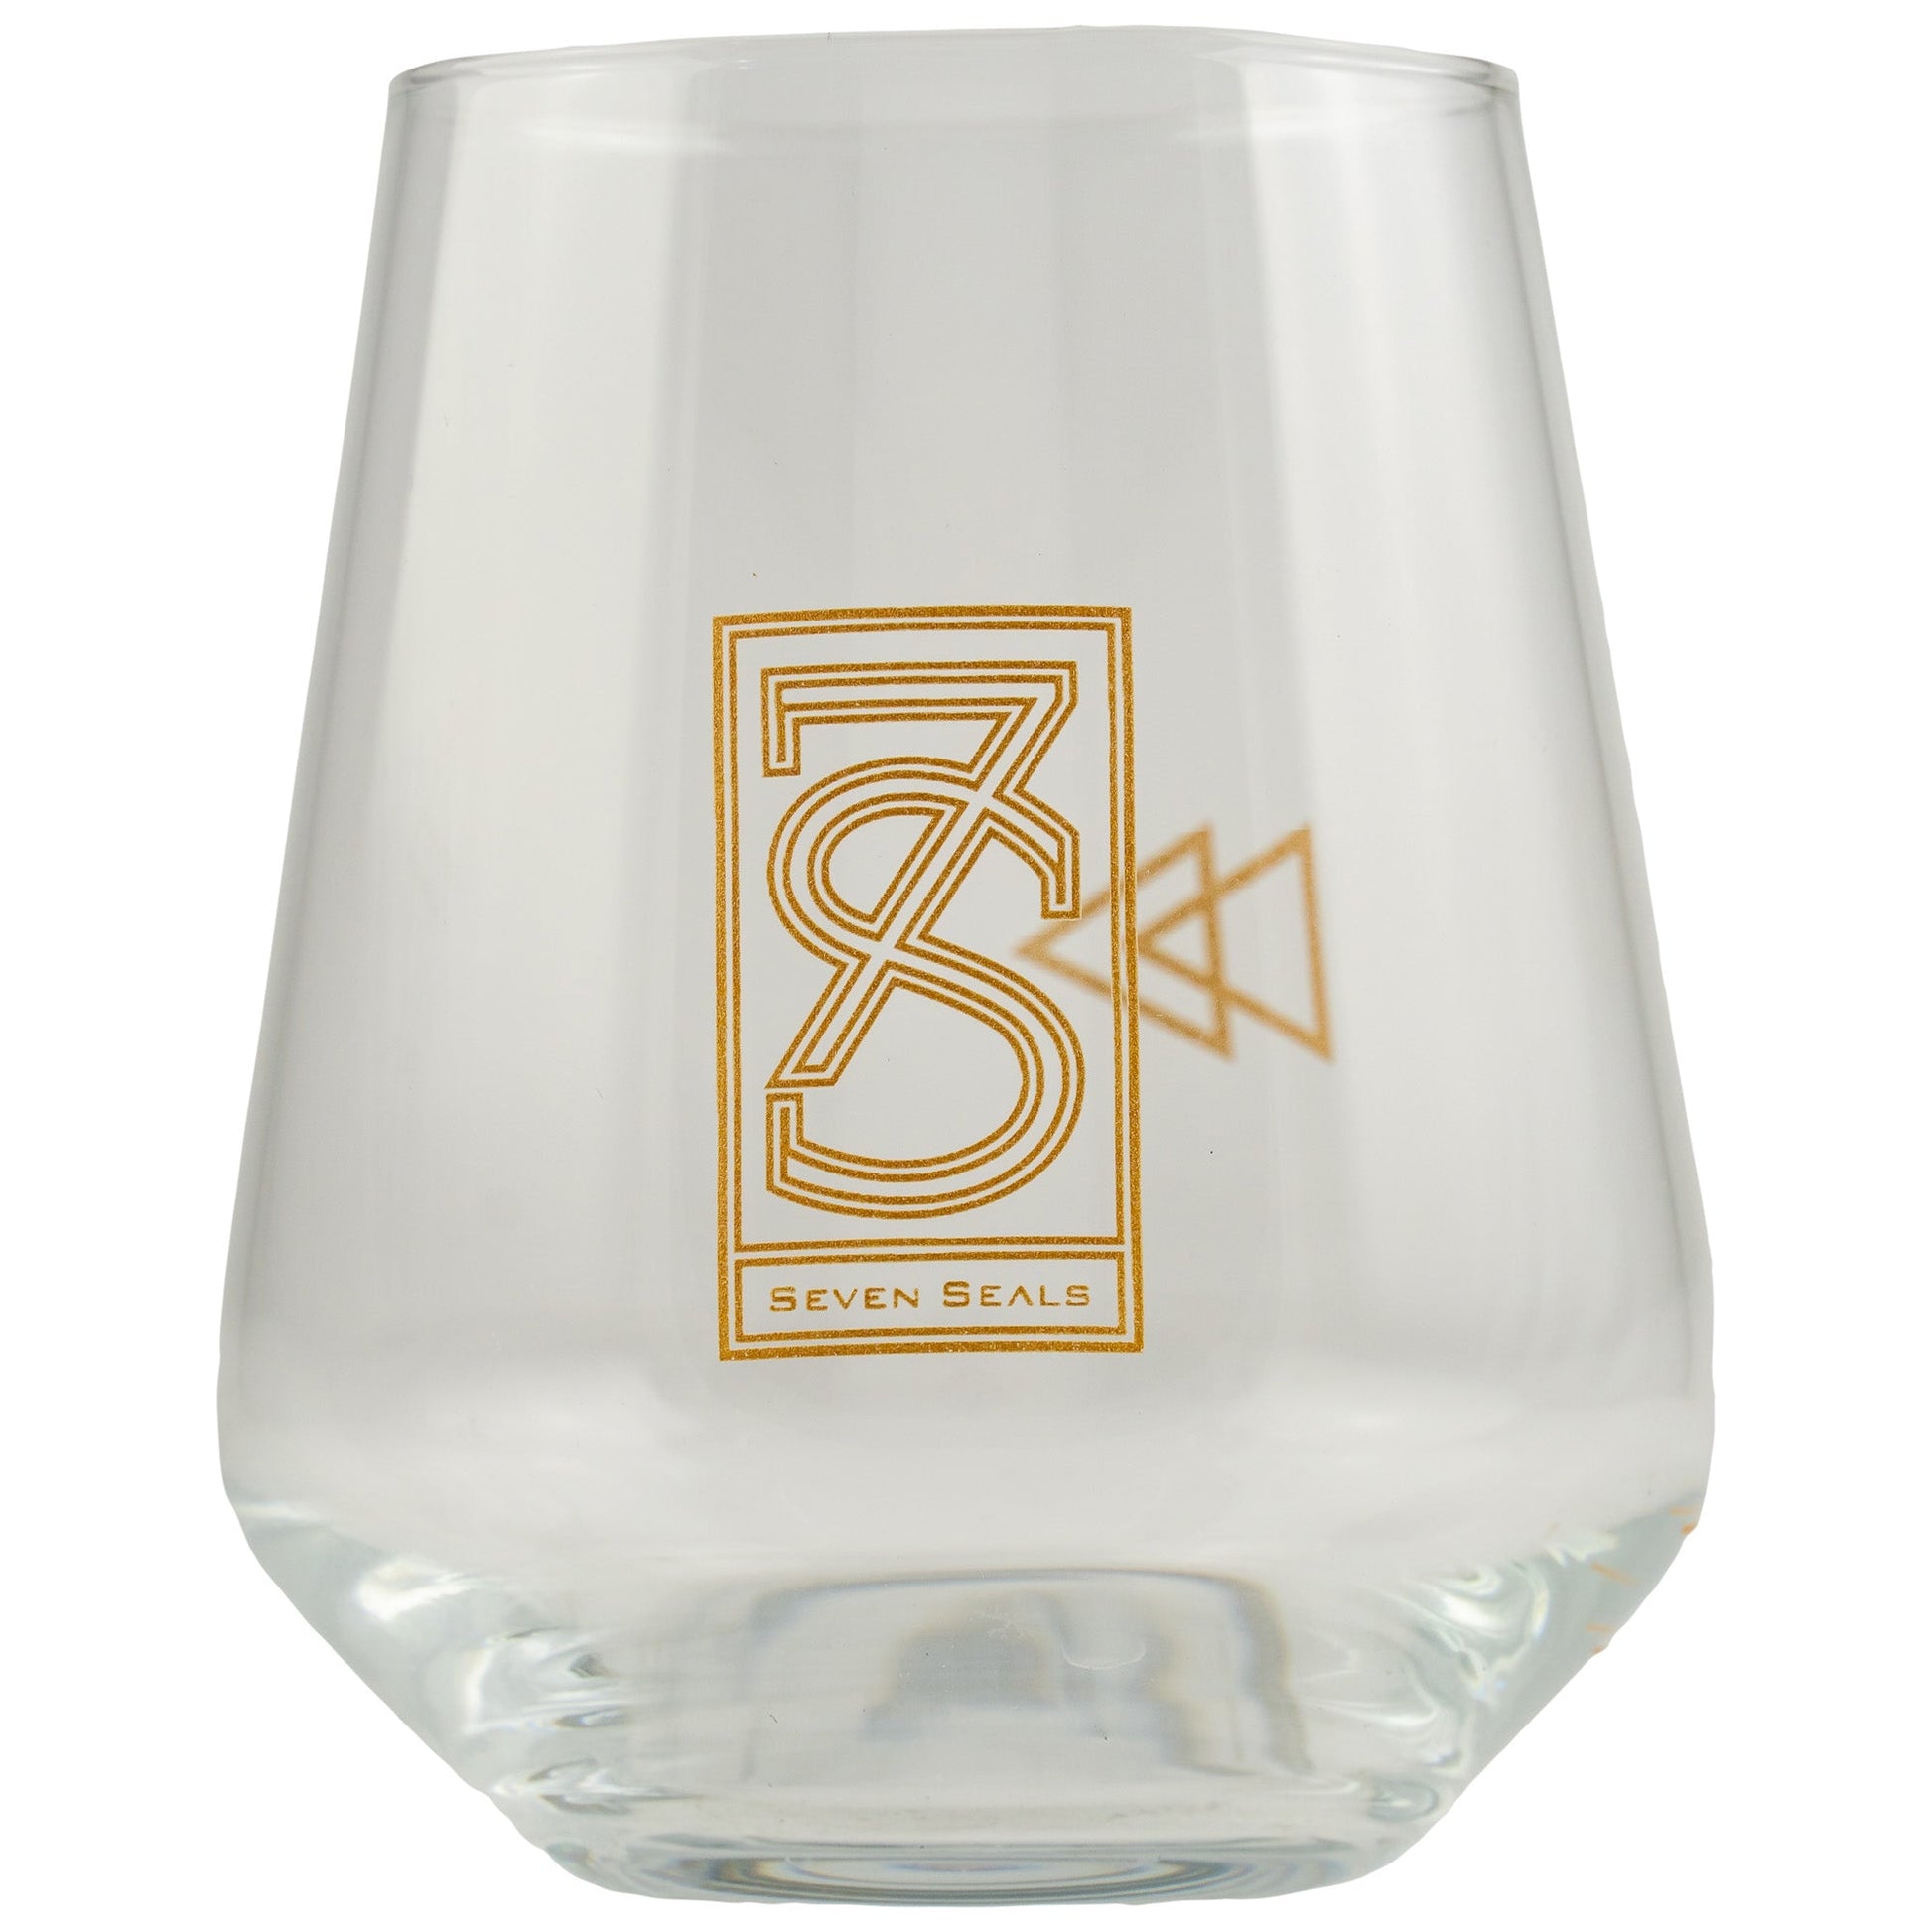 Seven Seals | The Age of Leo | 0,5l | 49,7% | inklusive 7Seals Whisky Glas GRATISGET A BOTTLE